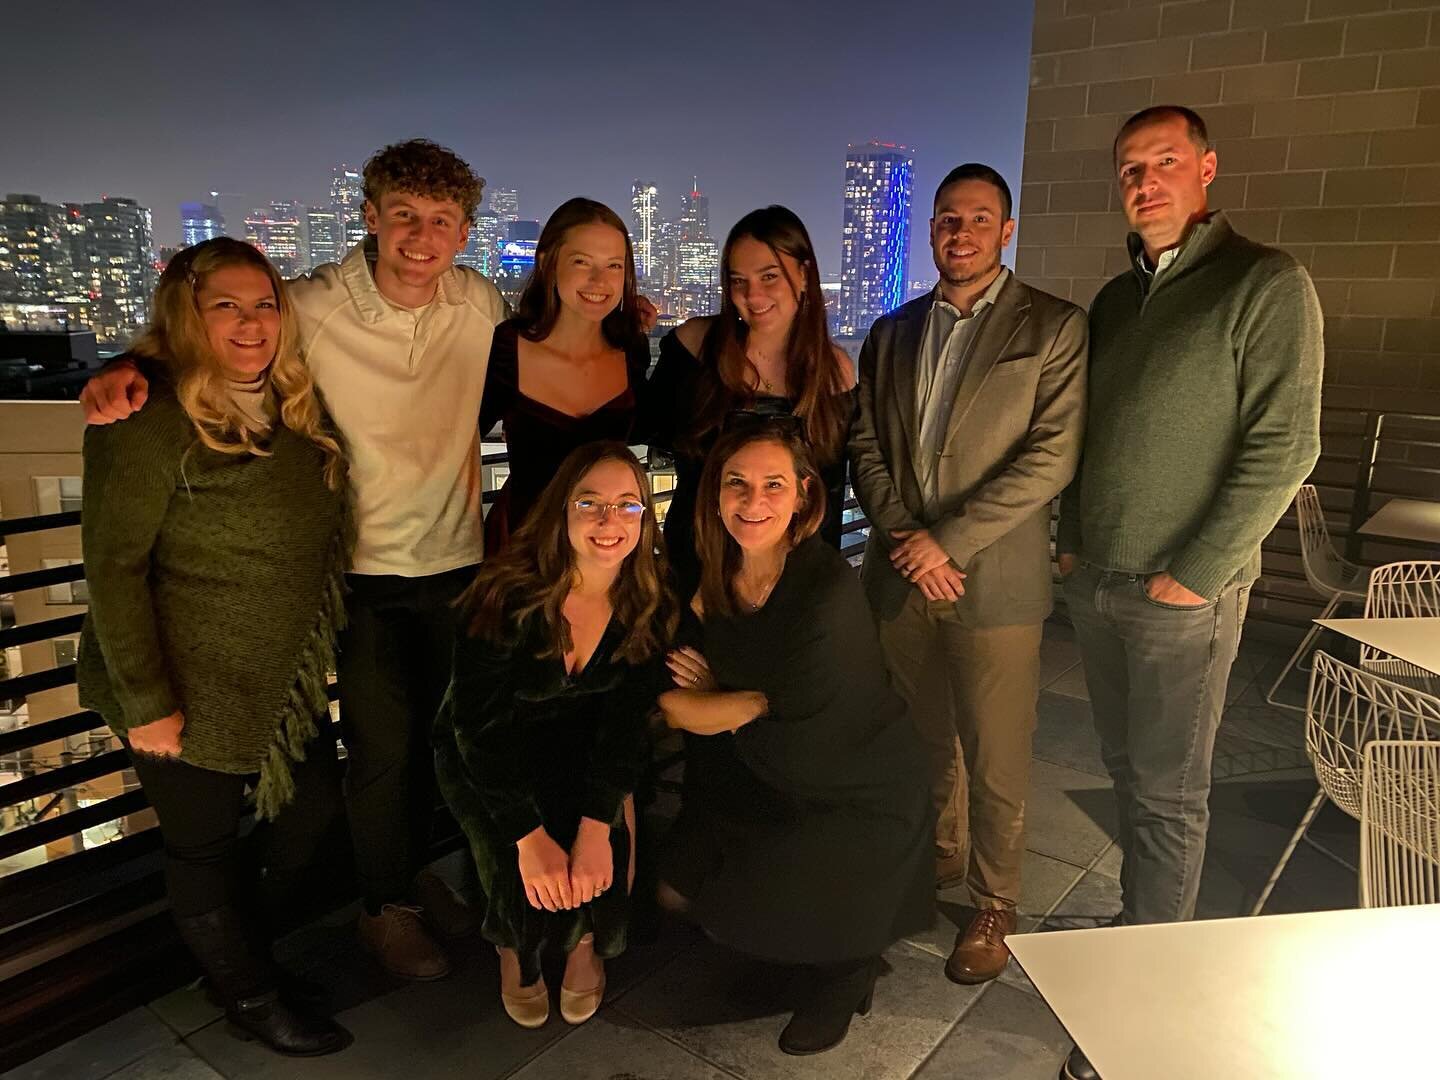 'Tis the time of year for celebrations, and that is exactly what we did last night! We were thrilled to continue our annual tradition of a very merry holiday dinner at @elfivedenver . It was a wonderful chance to celebrate our team here at Zaga, and 